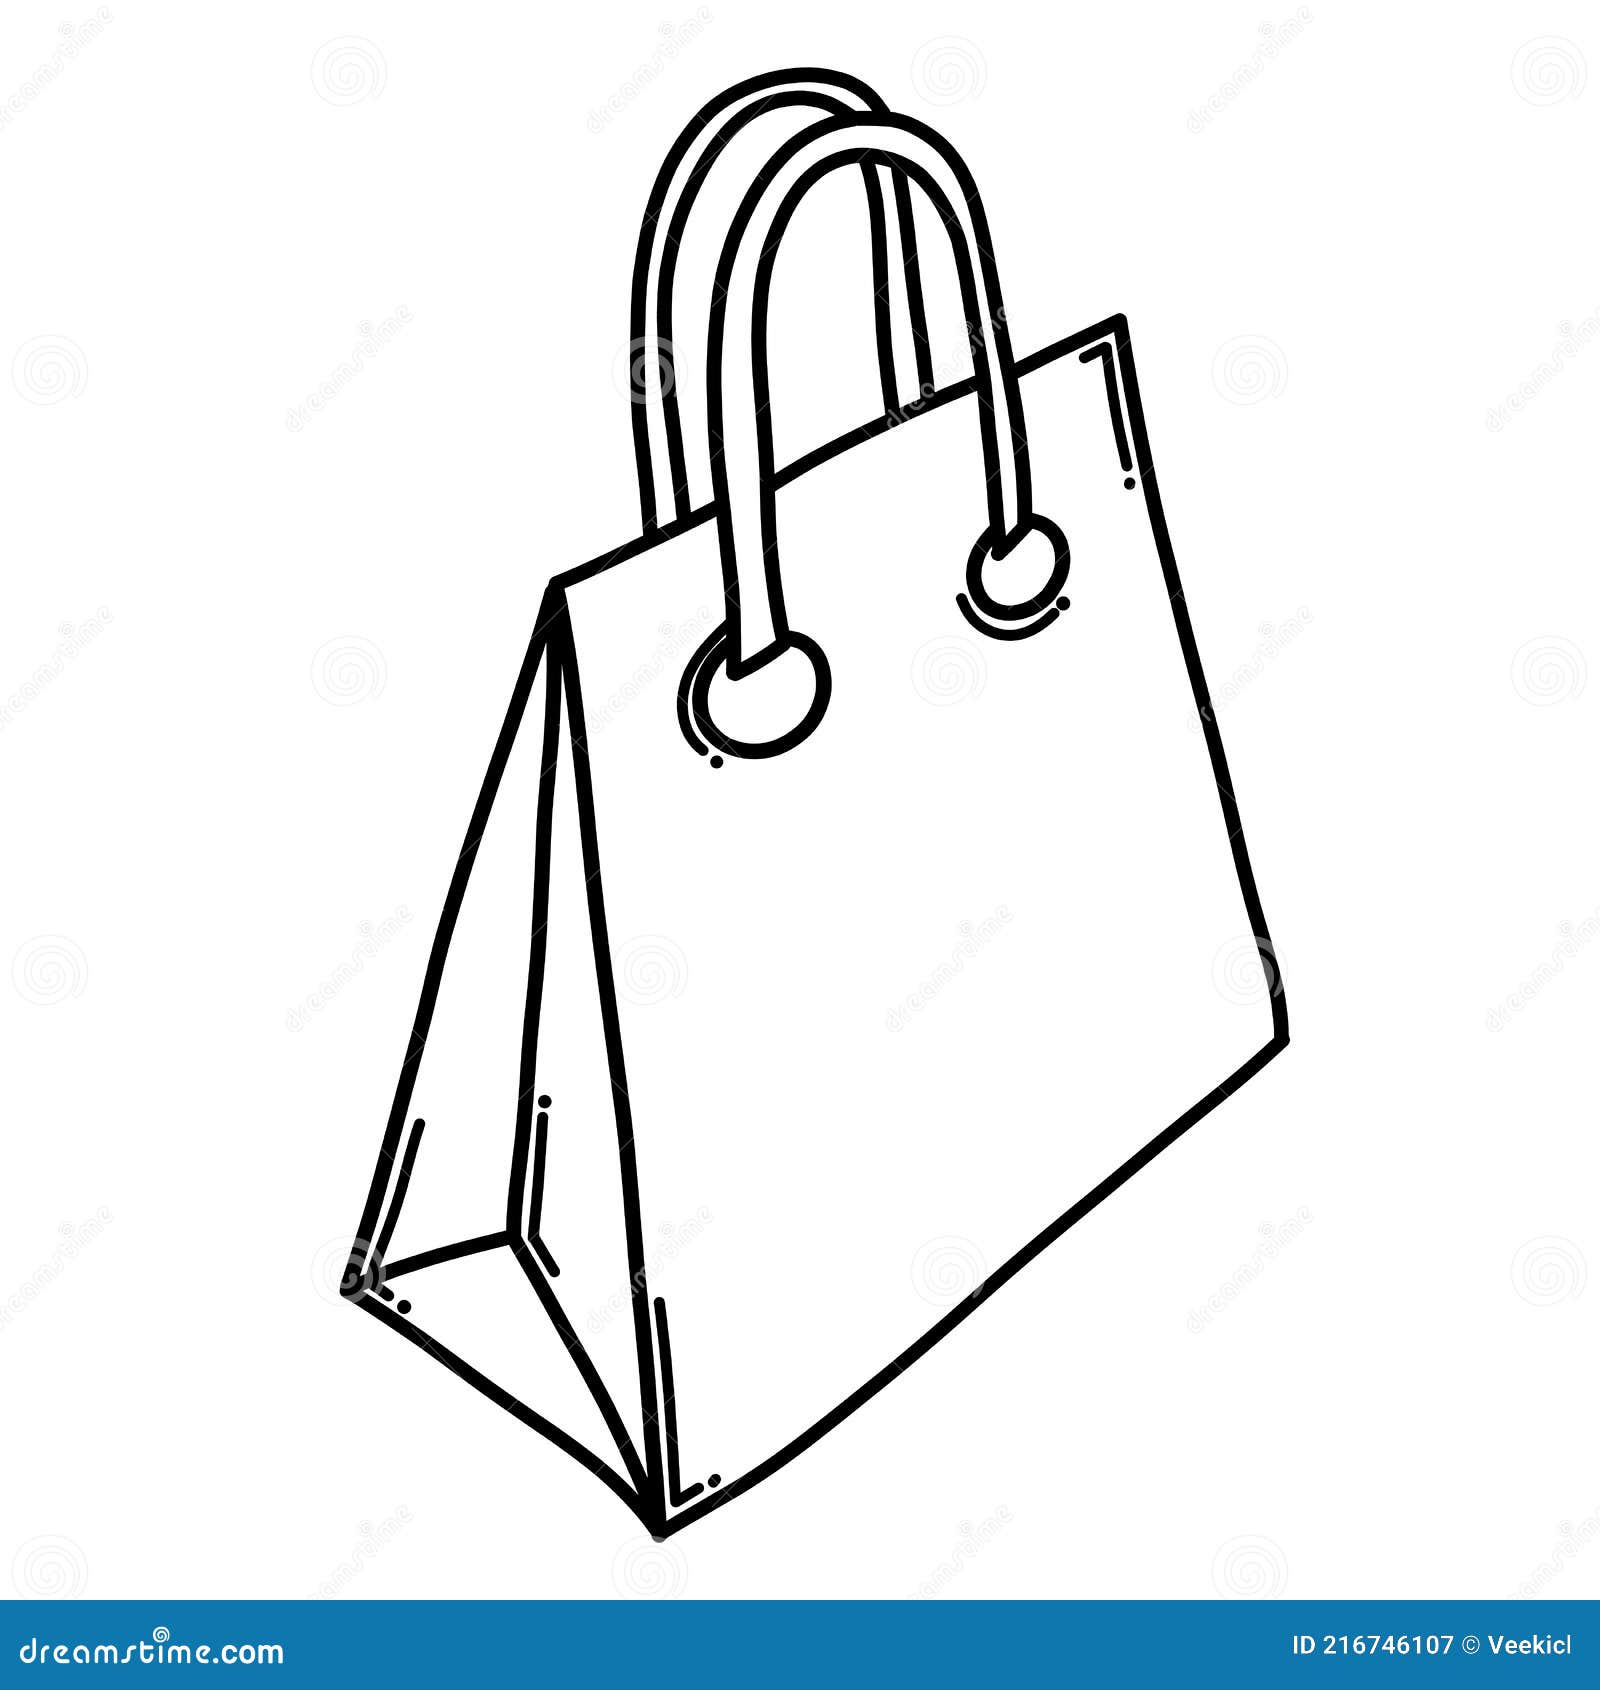 Shopping Bag Doodle Vector Icon. Drawing Sketch Illustration Hand Drawn  Cartoon Line Eps10 Stock Vector - Illustration of packet, gift: 216746107